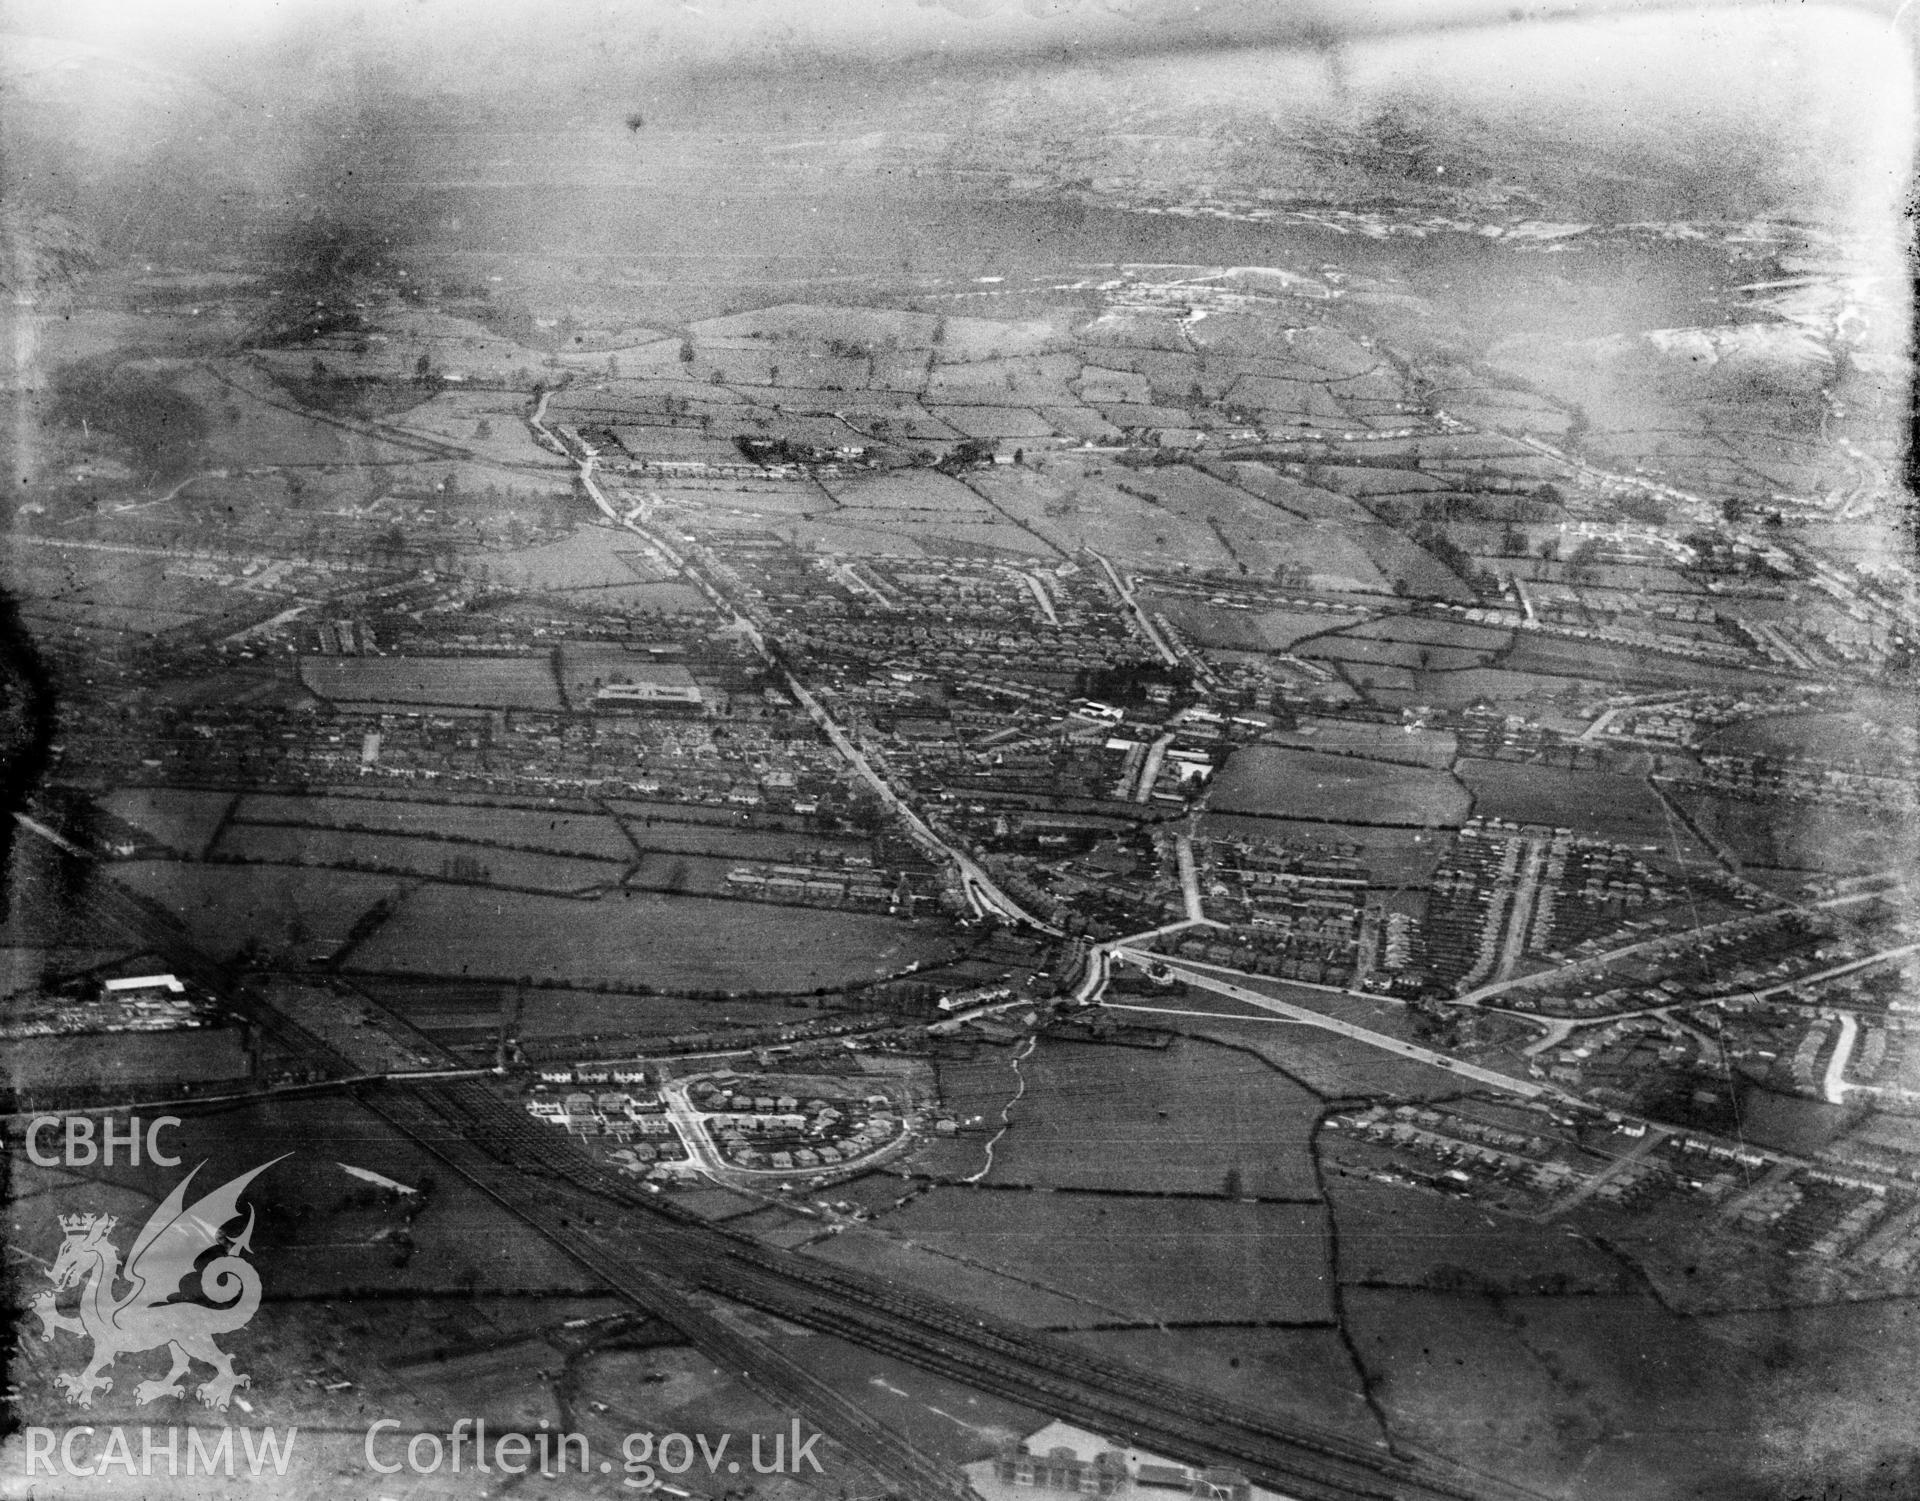 Distant view of Newport showing Usk estuary, oblique aerial view. 5?x4? black and white glass plate negative.